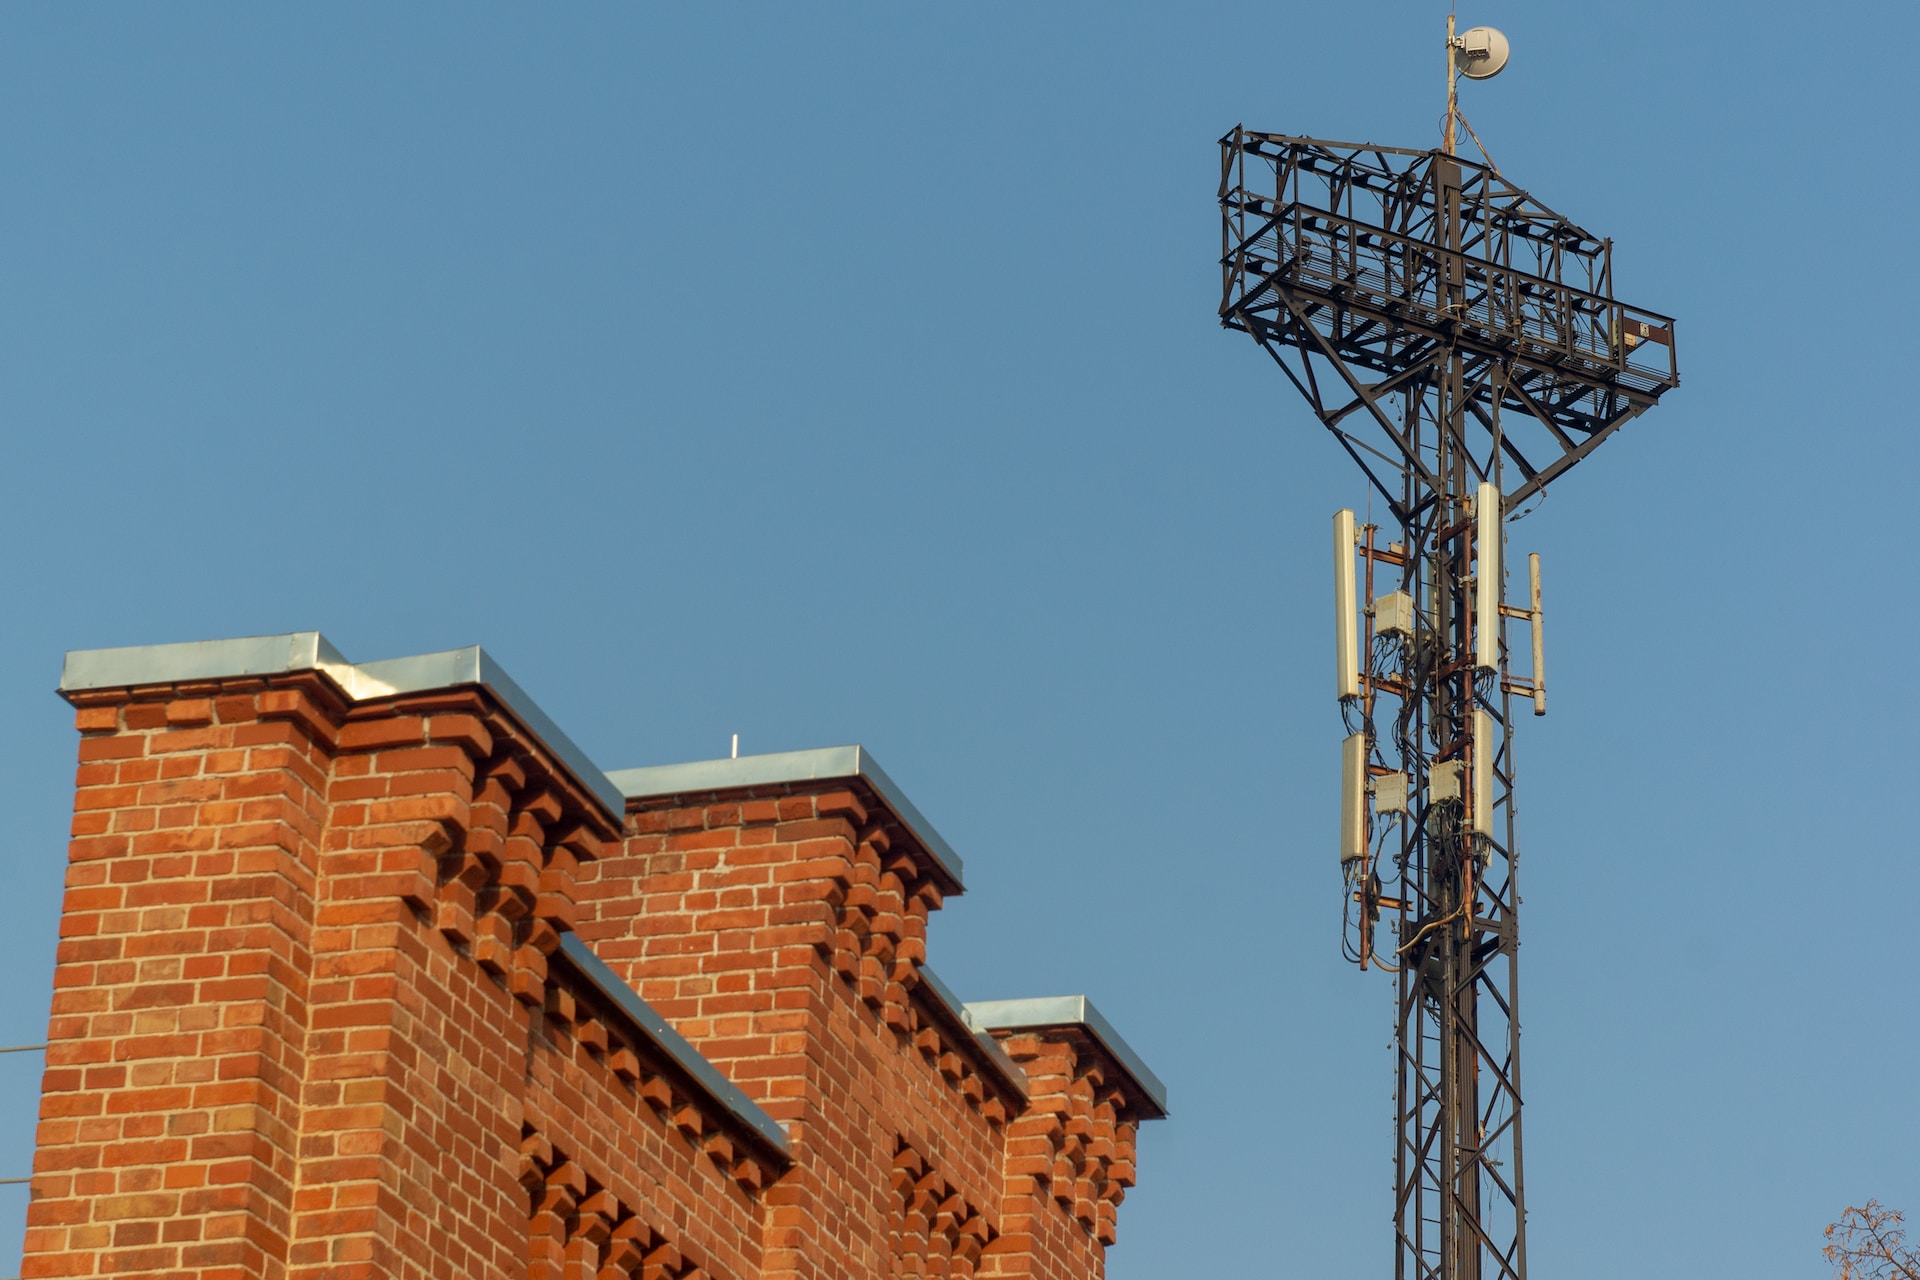 A mobile tower next to a brick building